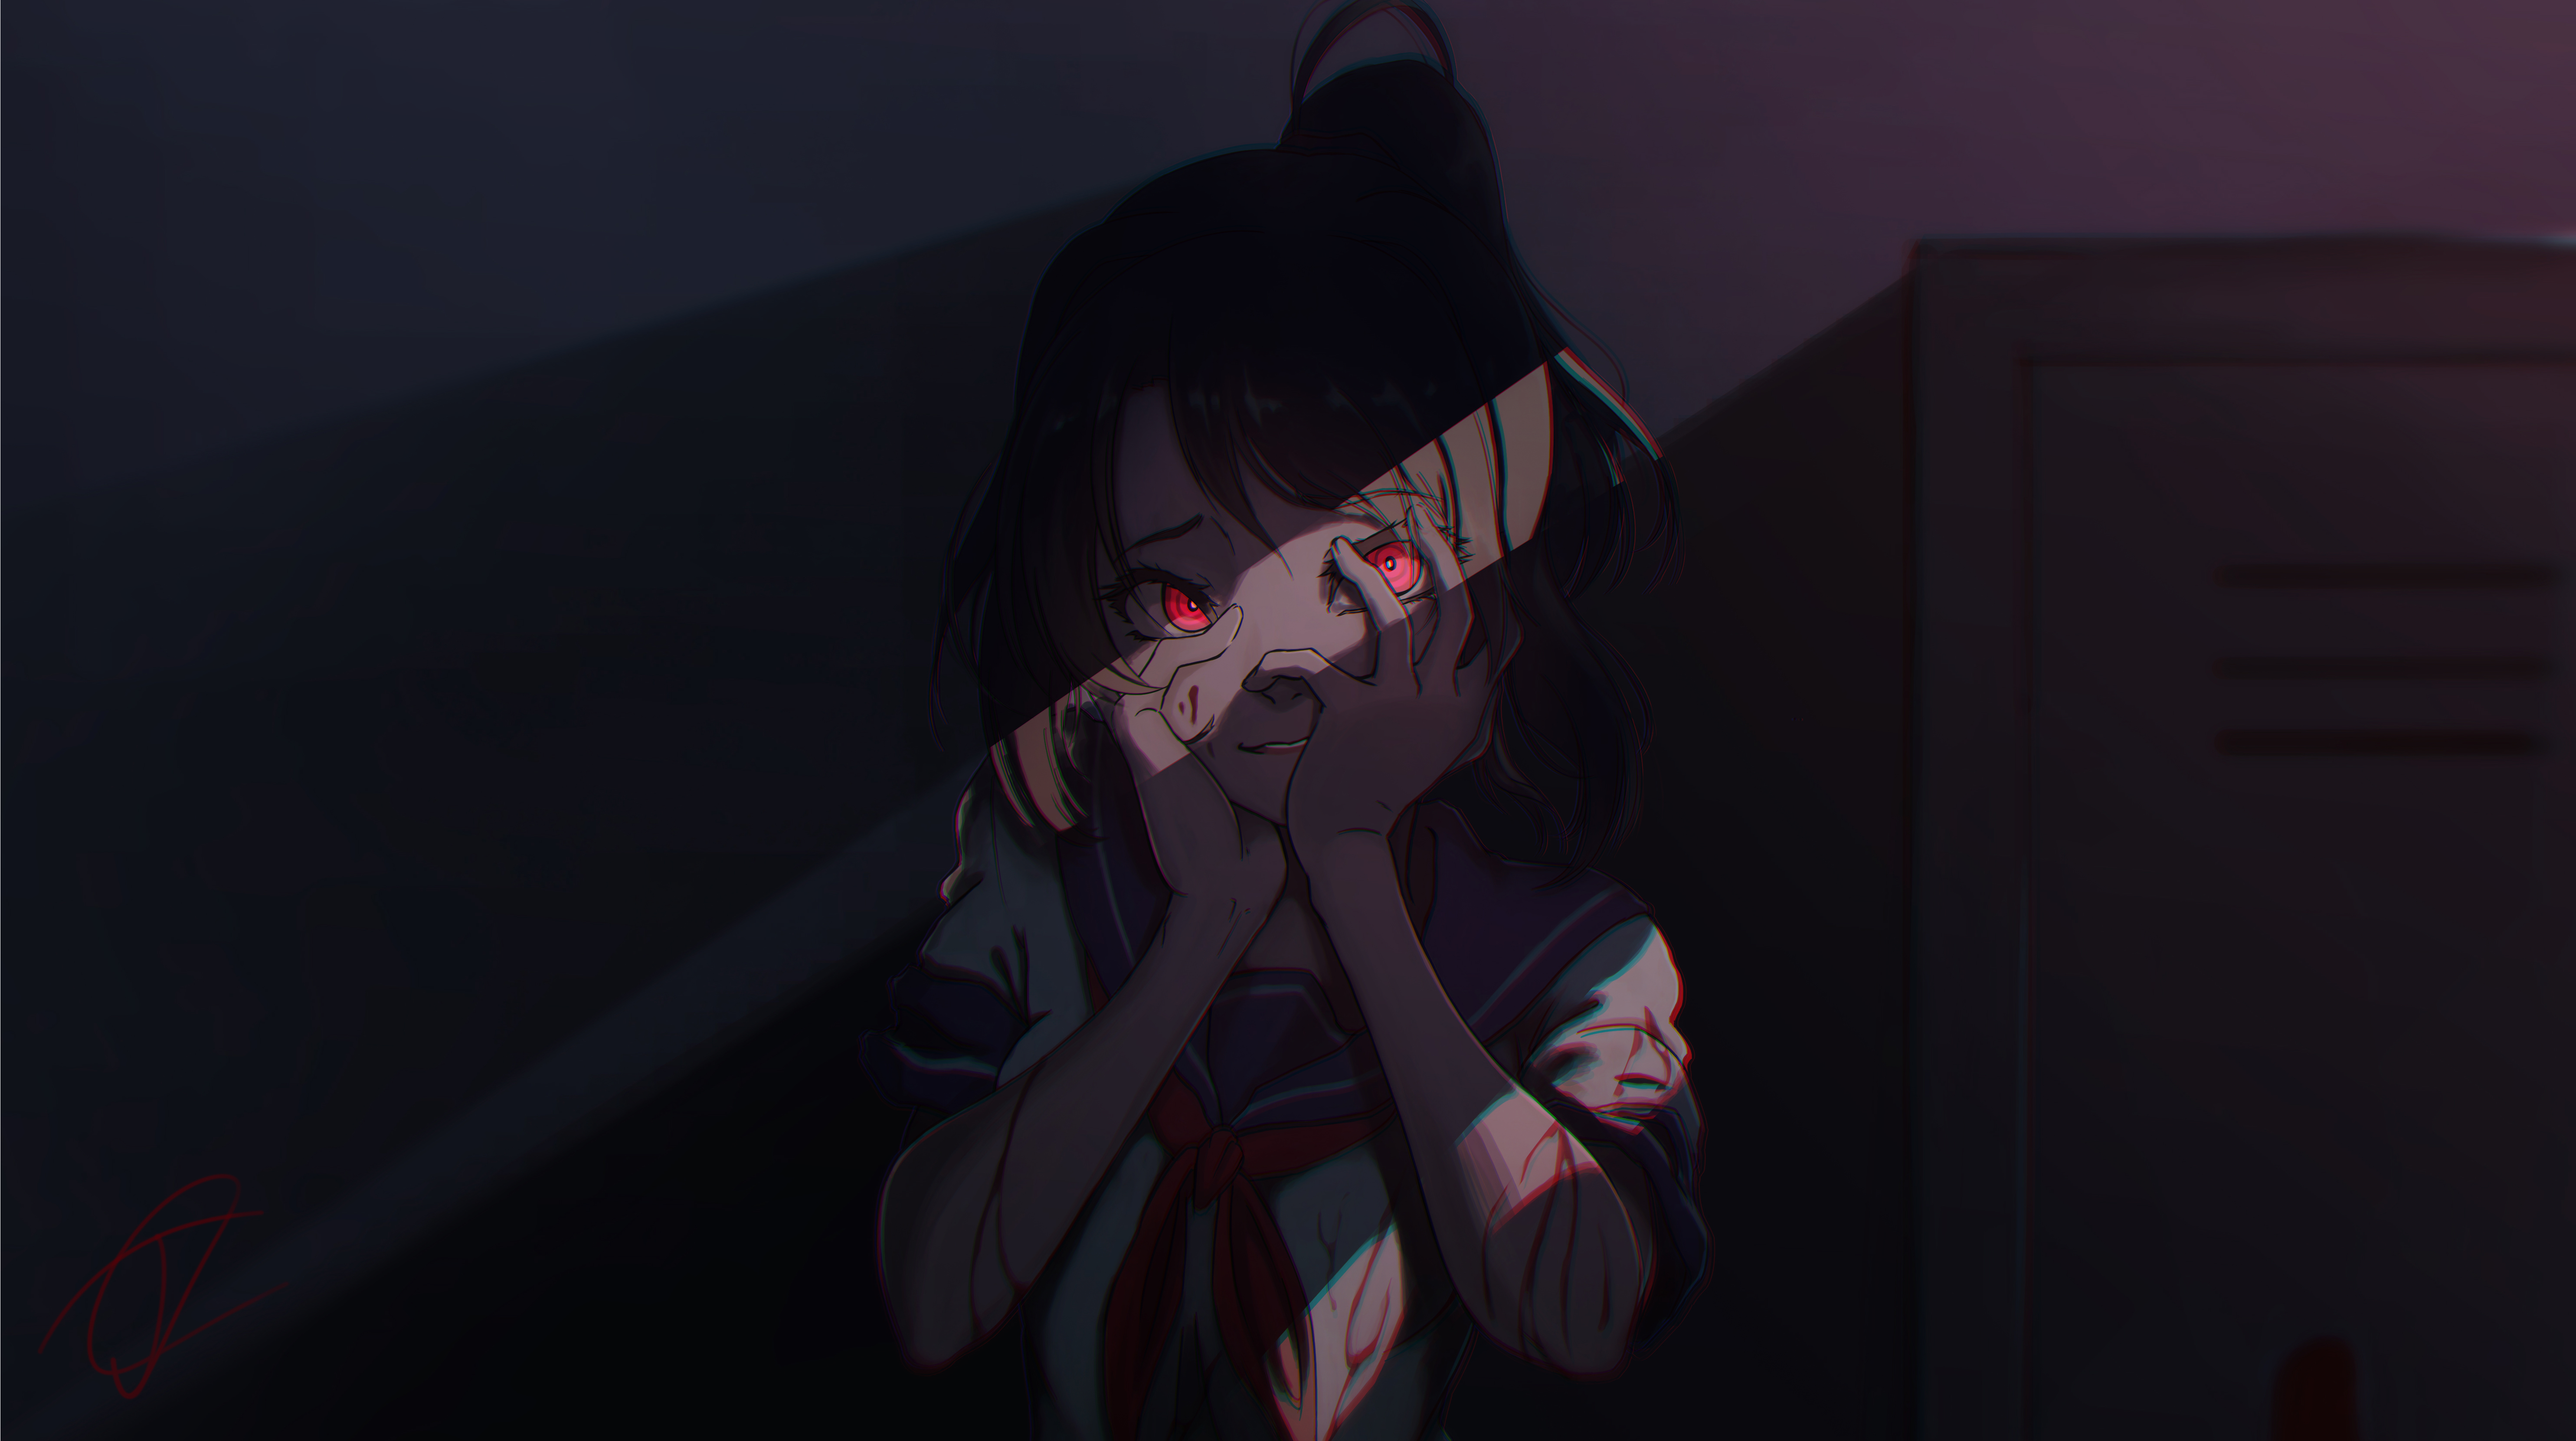 Yandere-chan in the shadows by Shyua